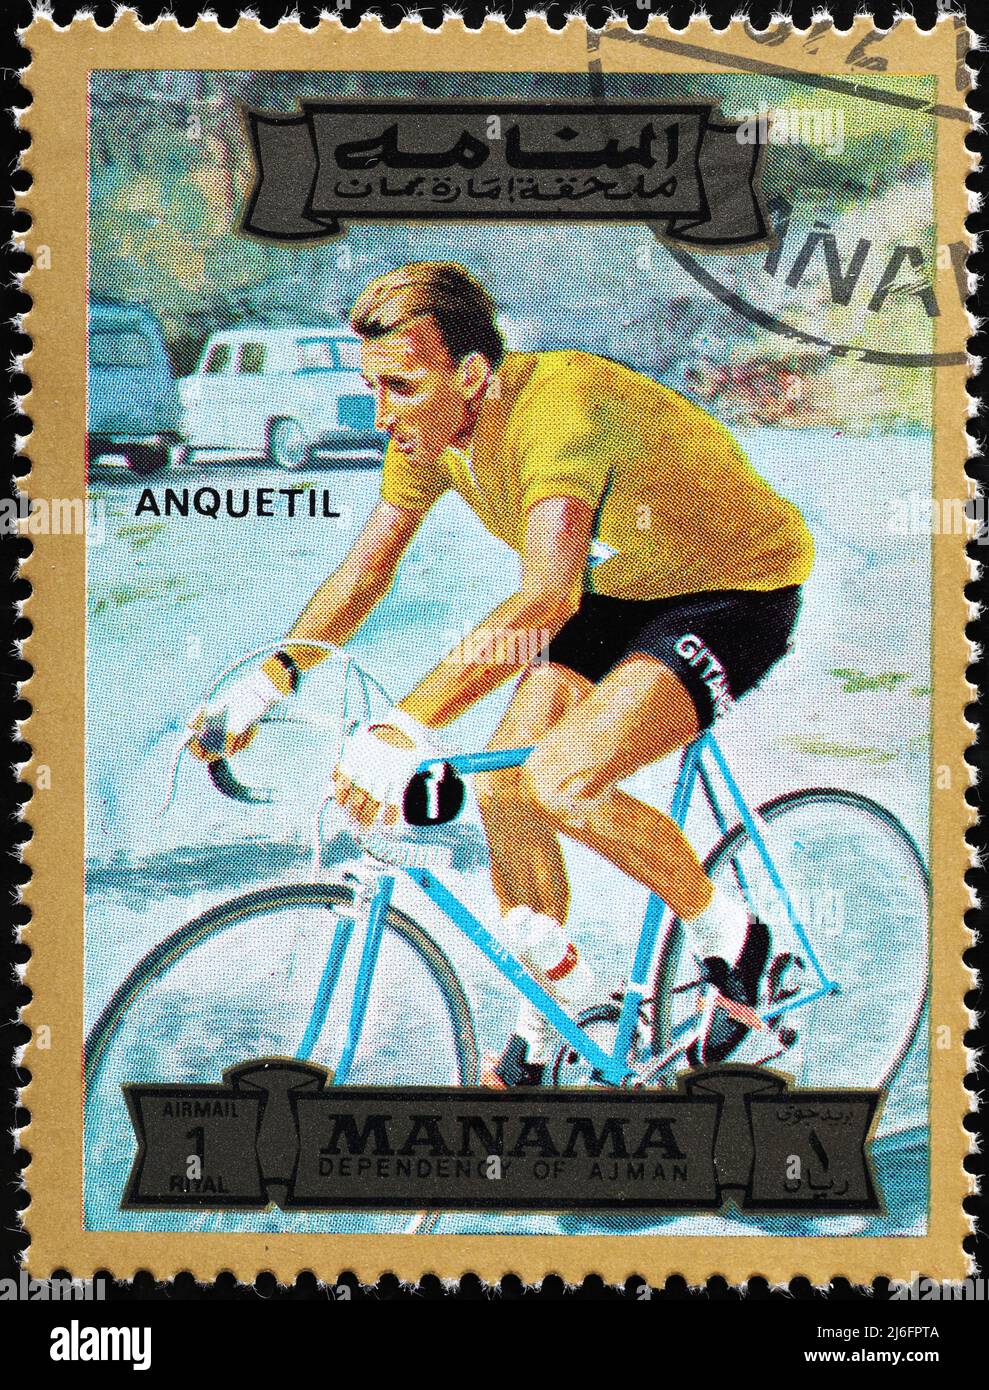 Road racing cyclist Jacques Anquetil on postage stamp Stock Photo